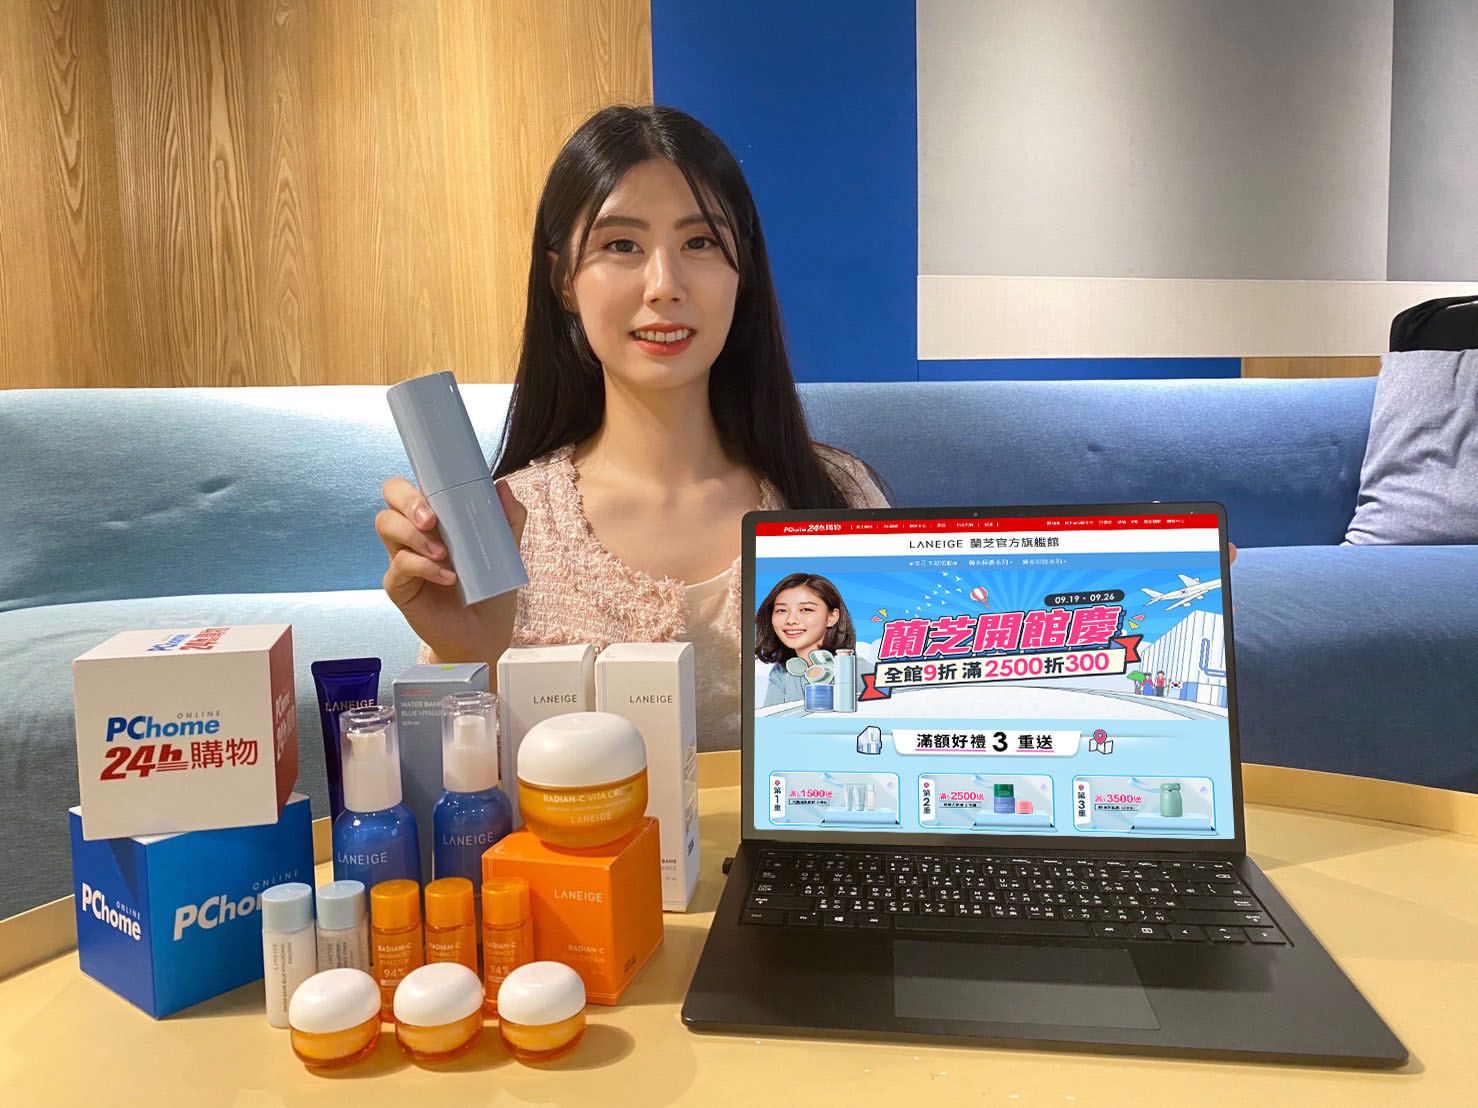 PChome 24h Shopping Joins Hands with LANEIGE to Open the Flagship Store  Exclusive Campaign of "Buy One and Get One Free" for Popular Products with a Time-Limited Discount 57% off